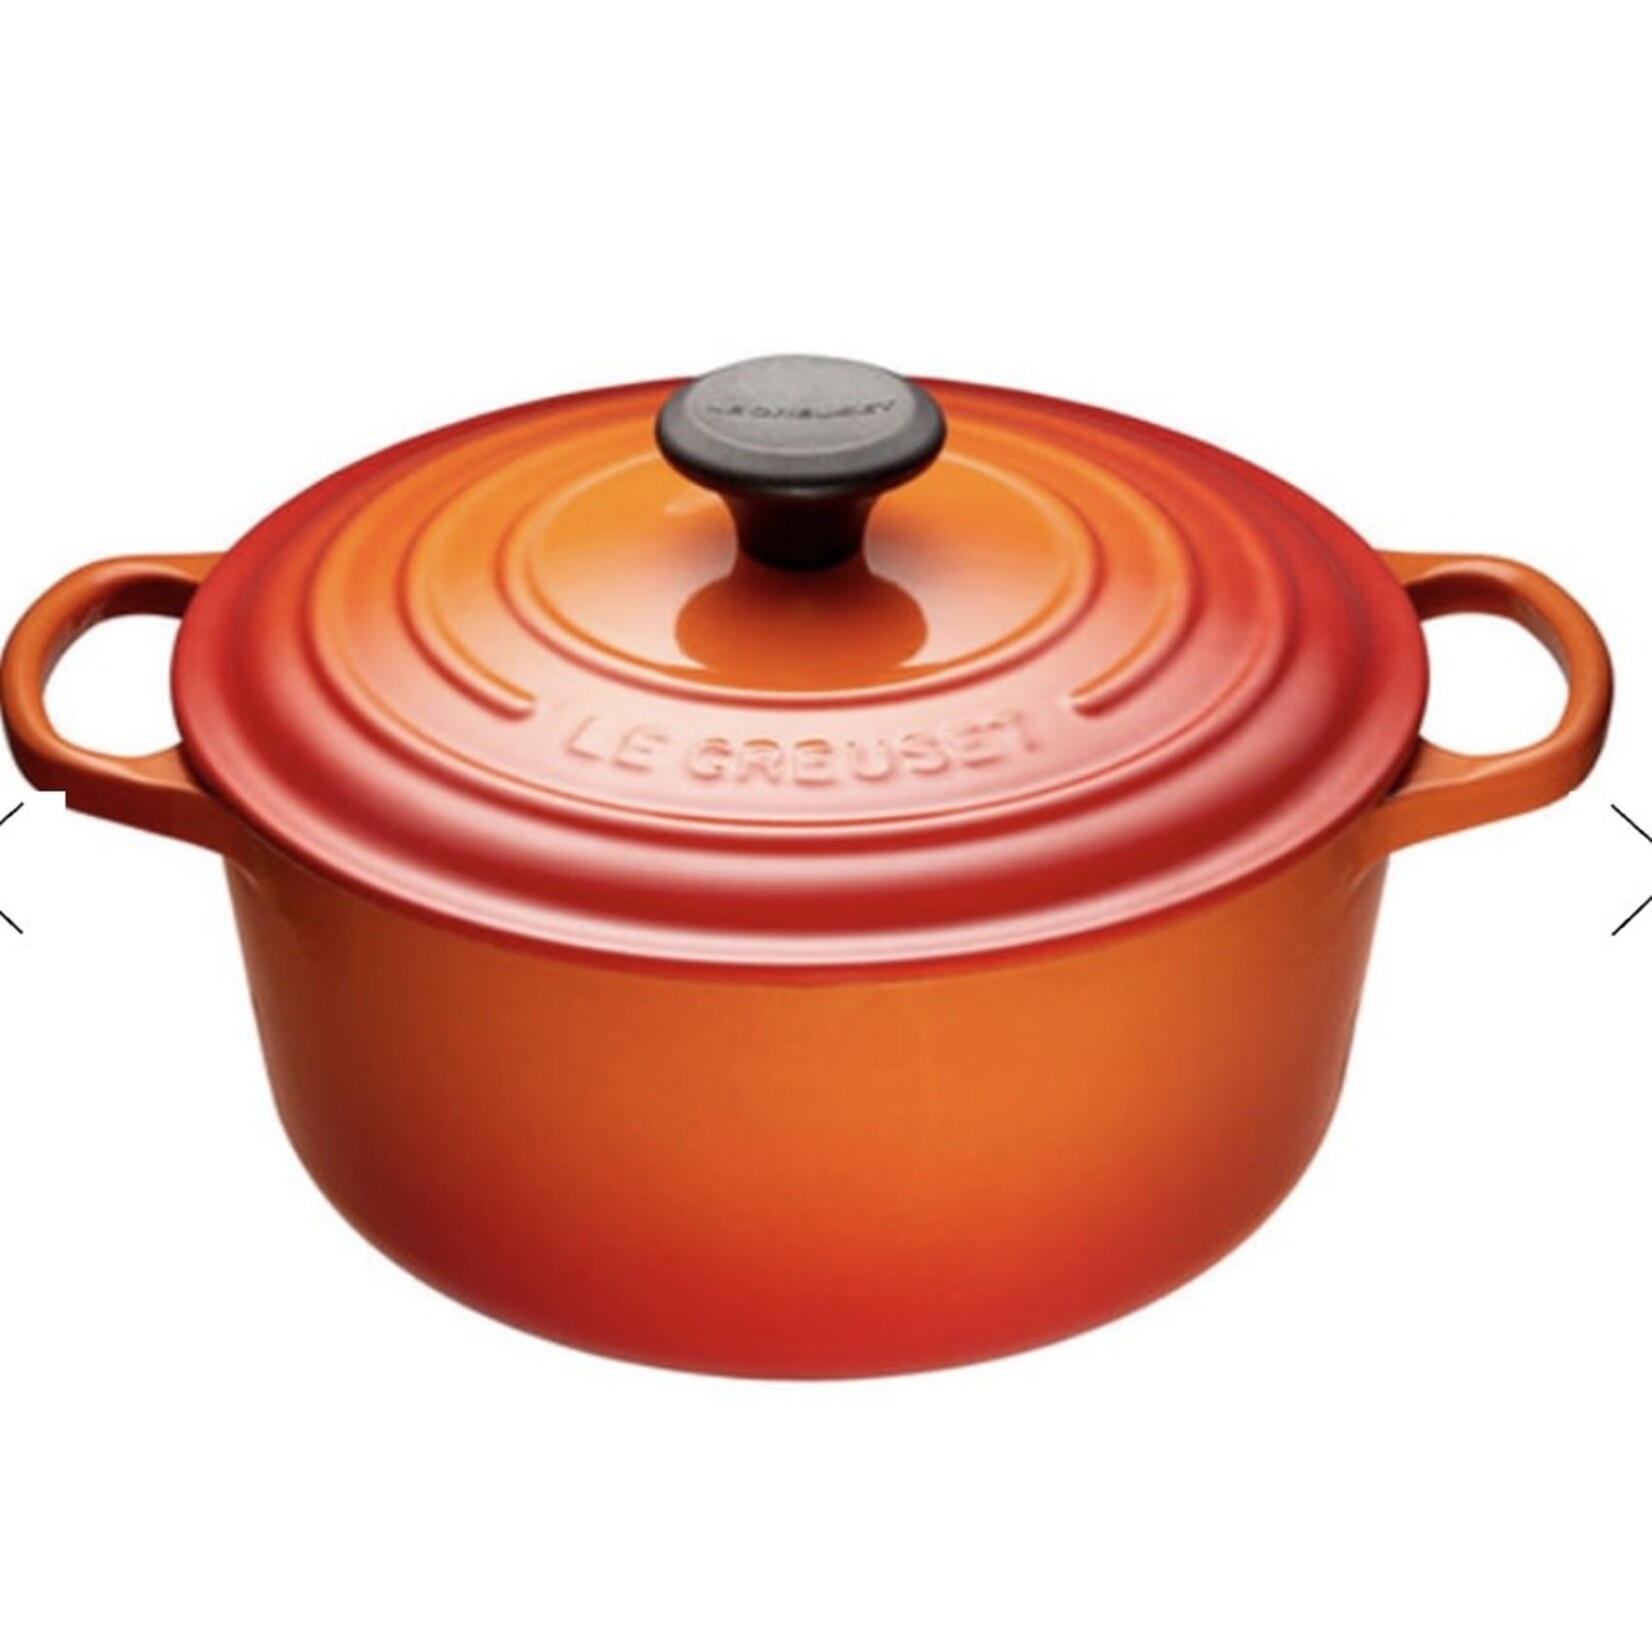 LE CREUSET LE CREUSET Round French Oven 4.1L Flame